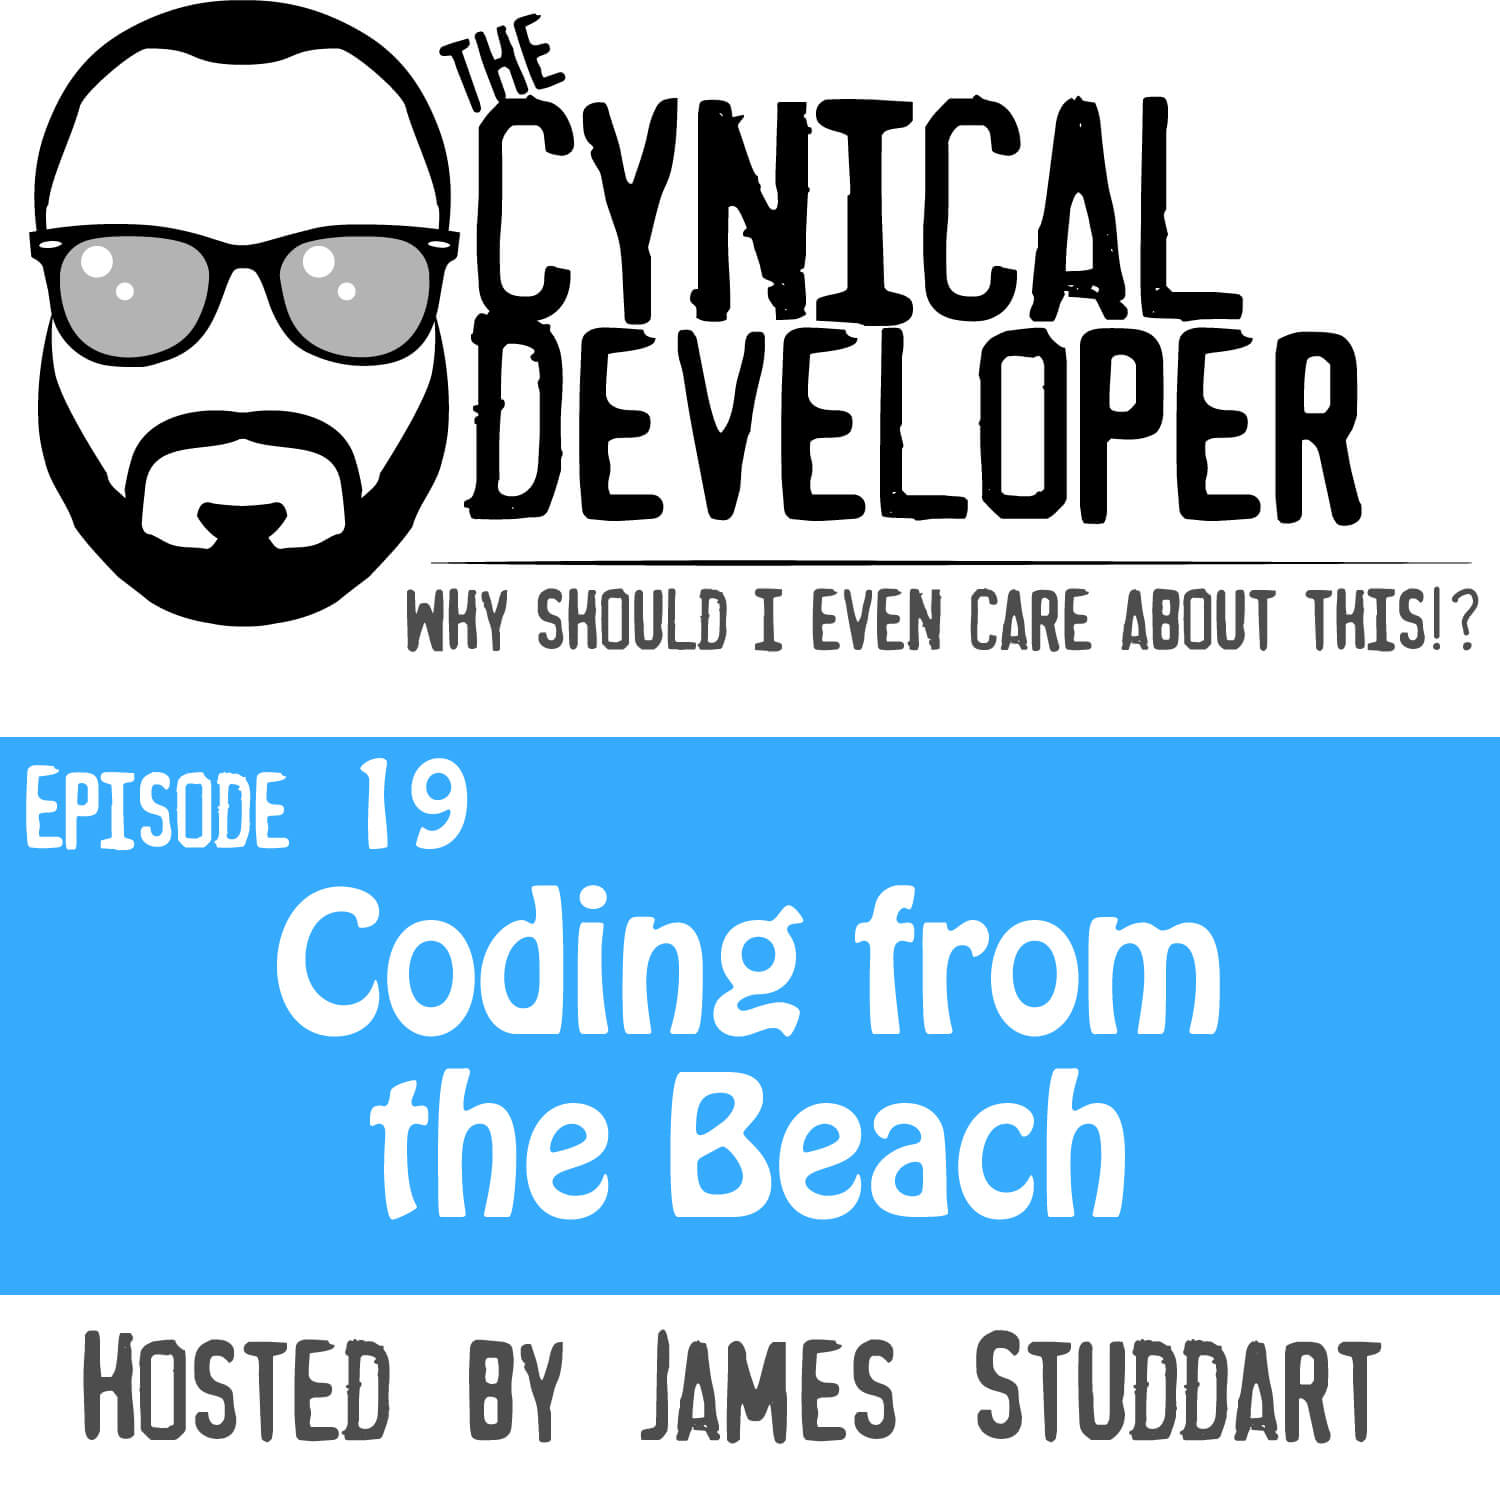 Episode 19 - Coding from the Beach!